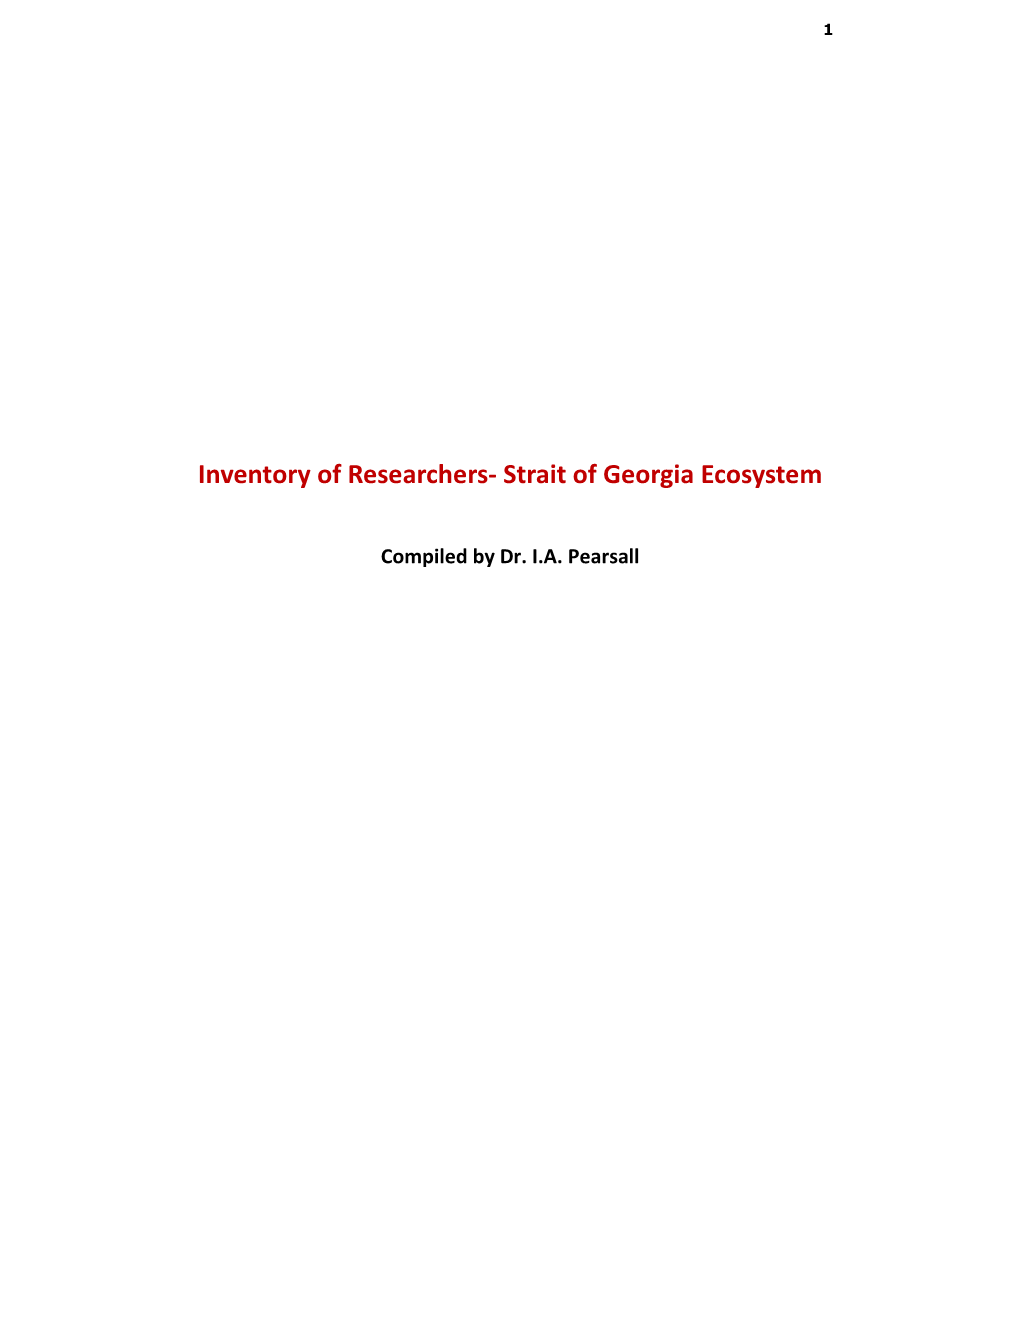 Inventory of Researchers- Strait of Georgia Ecosystem